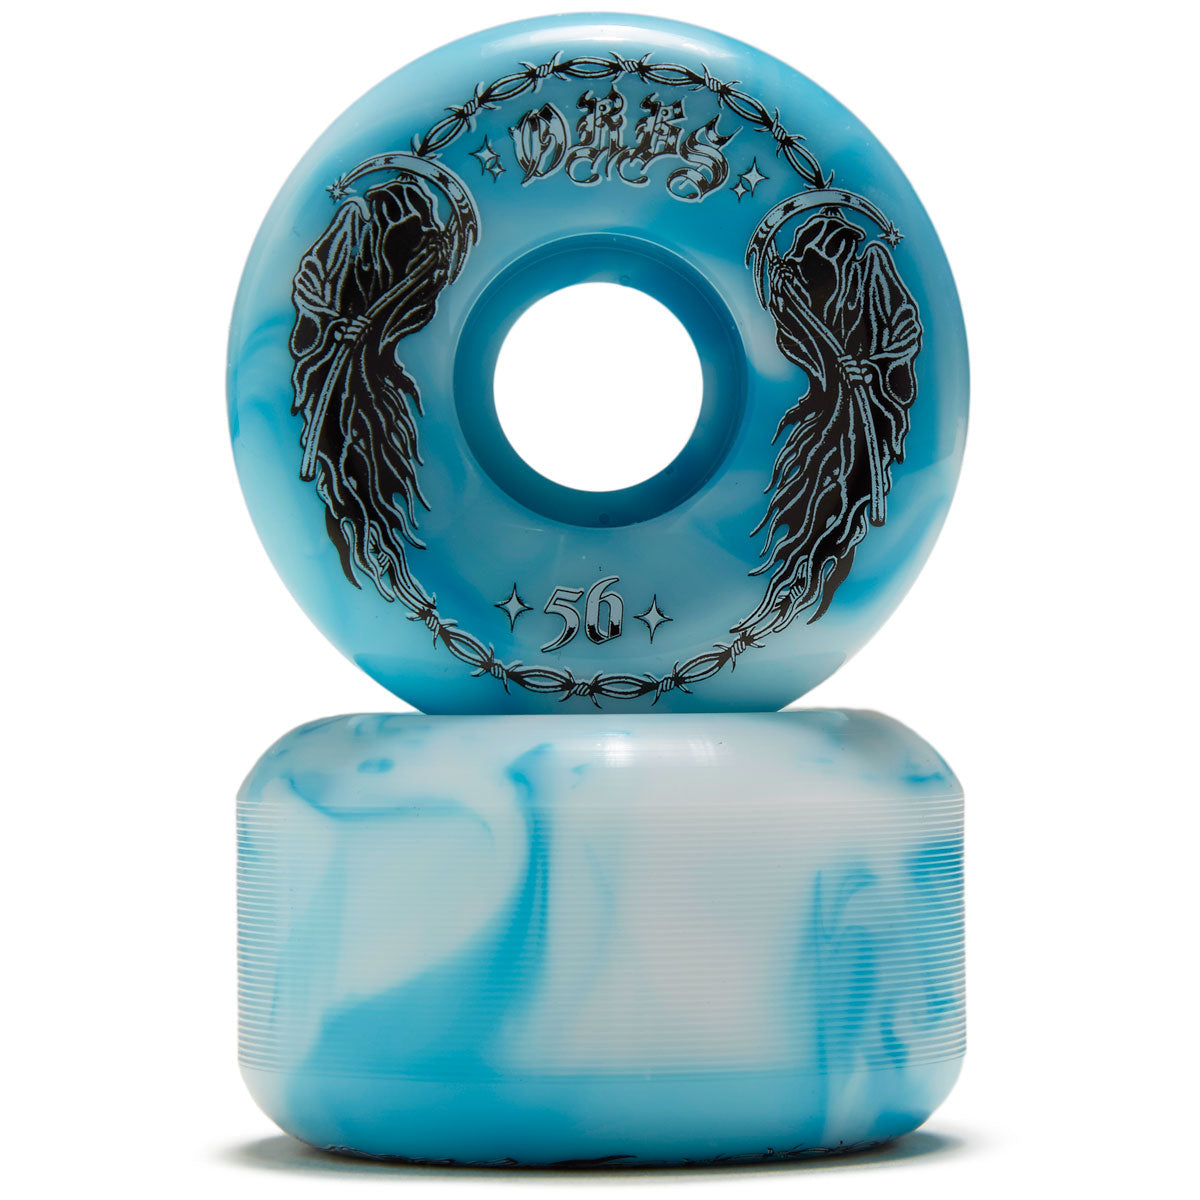 Welcome Orbs Specters '23 Conical 99A Skateboard Wheels - Blue/White Swirl - 56mm image 2